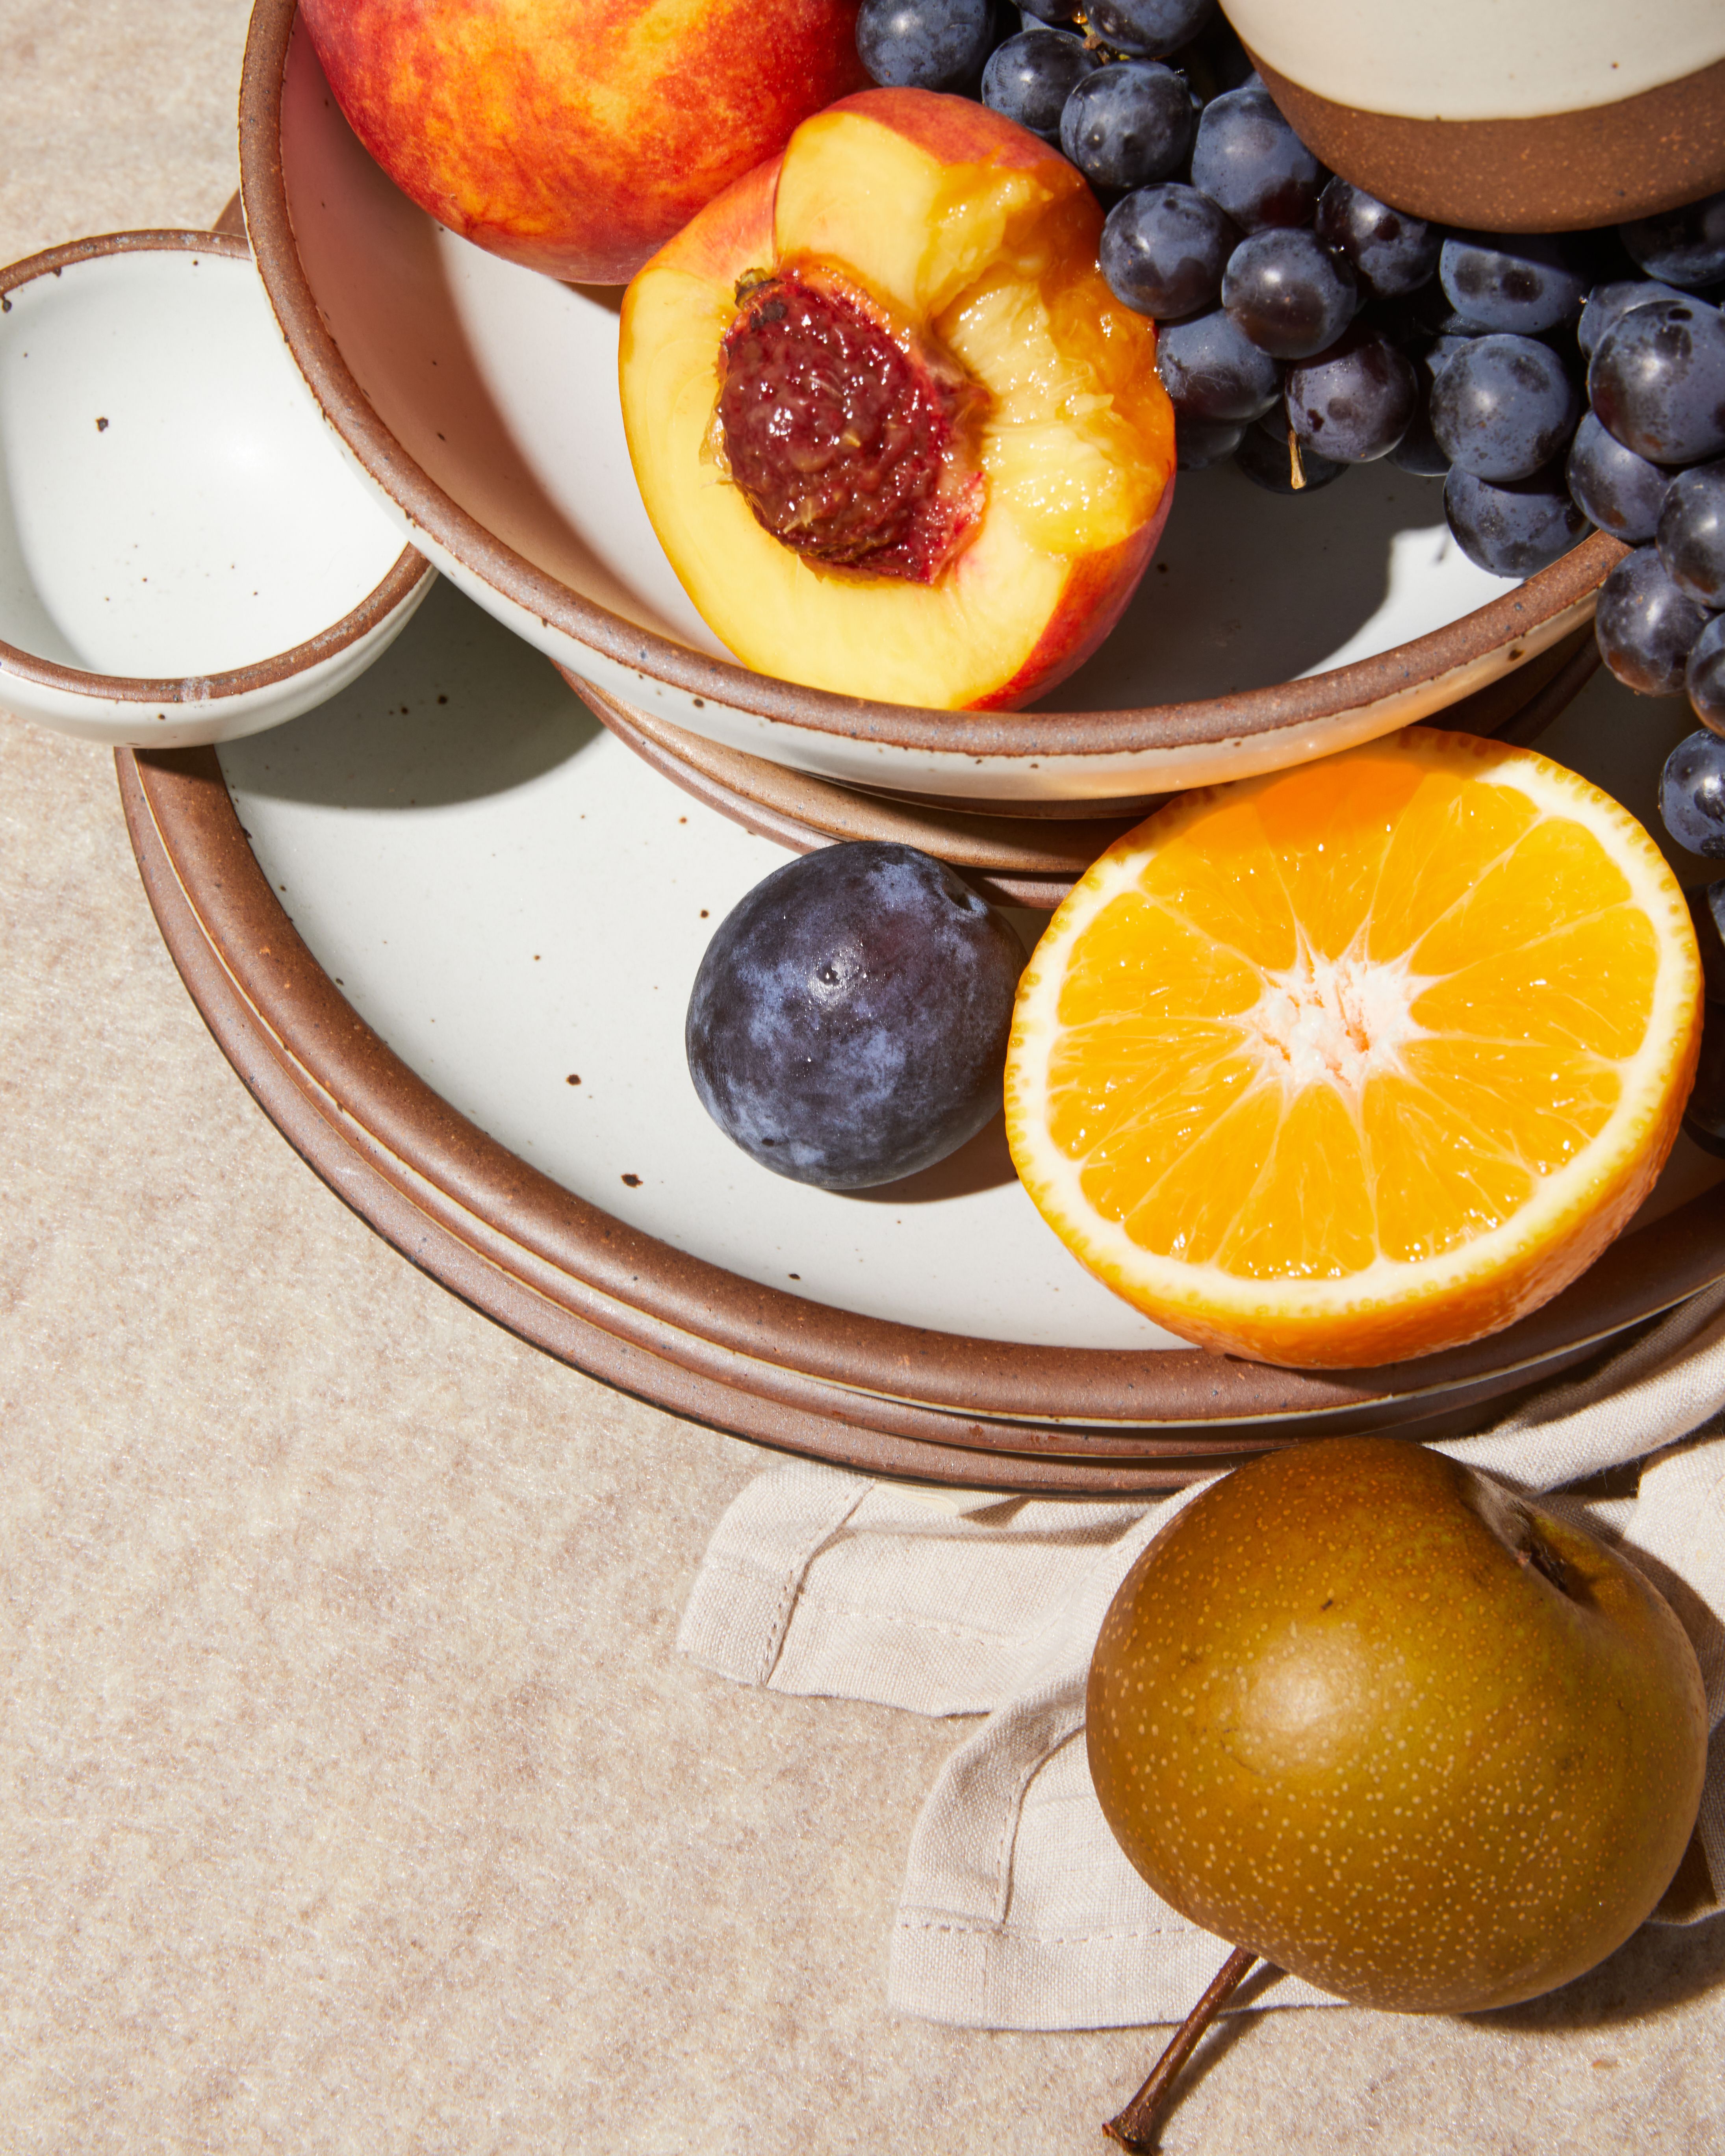 Oranges and grapes in an Amaro bowl on a light blue towel